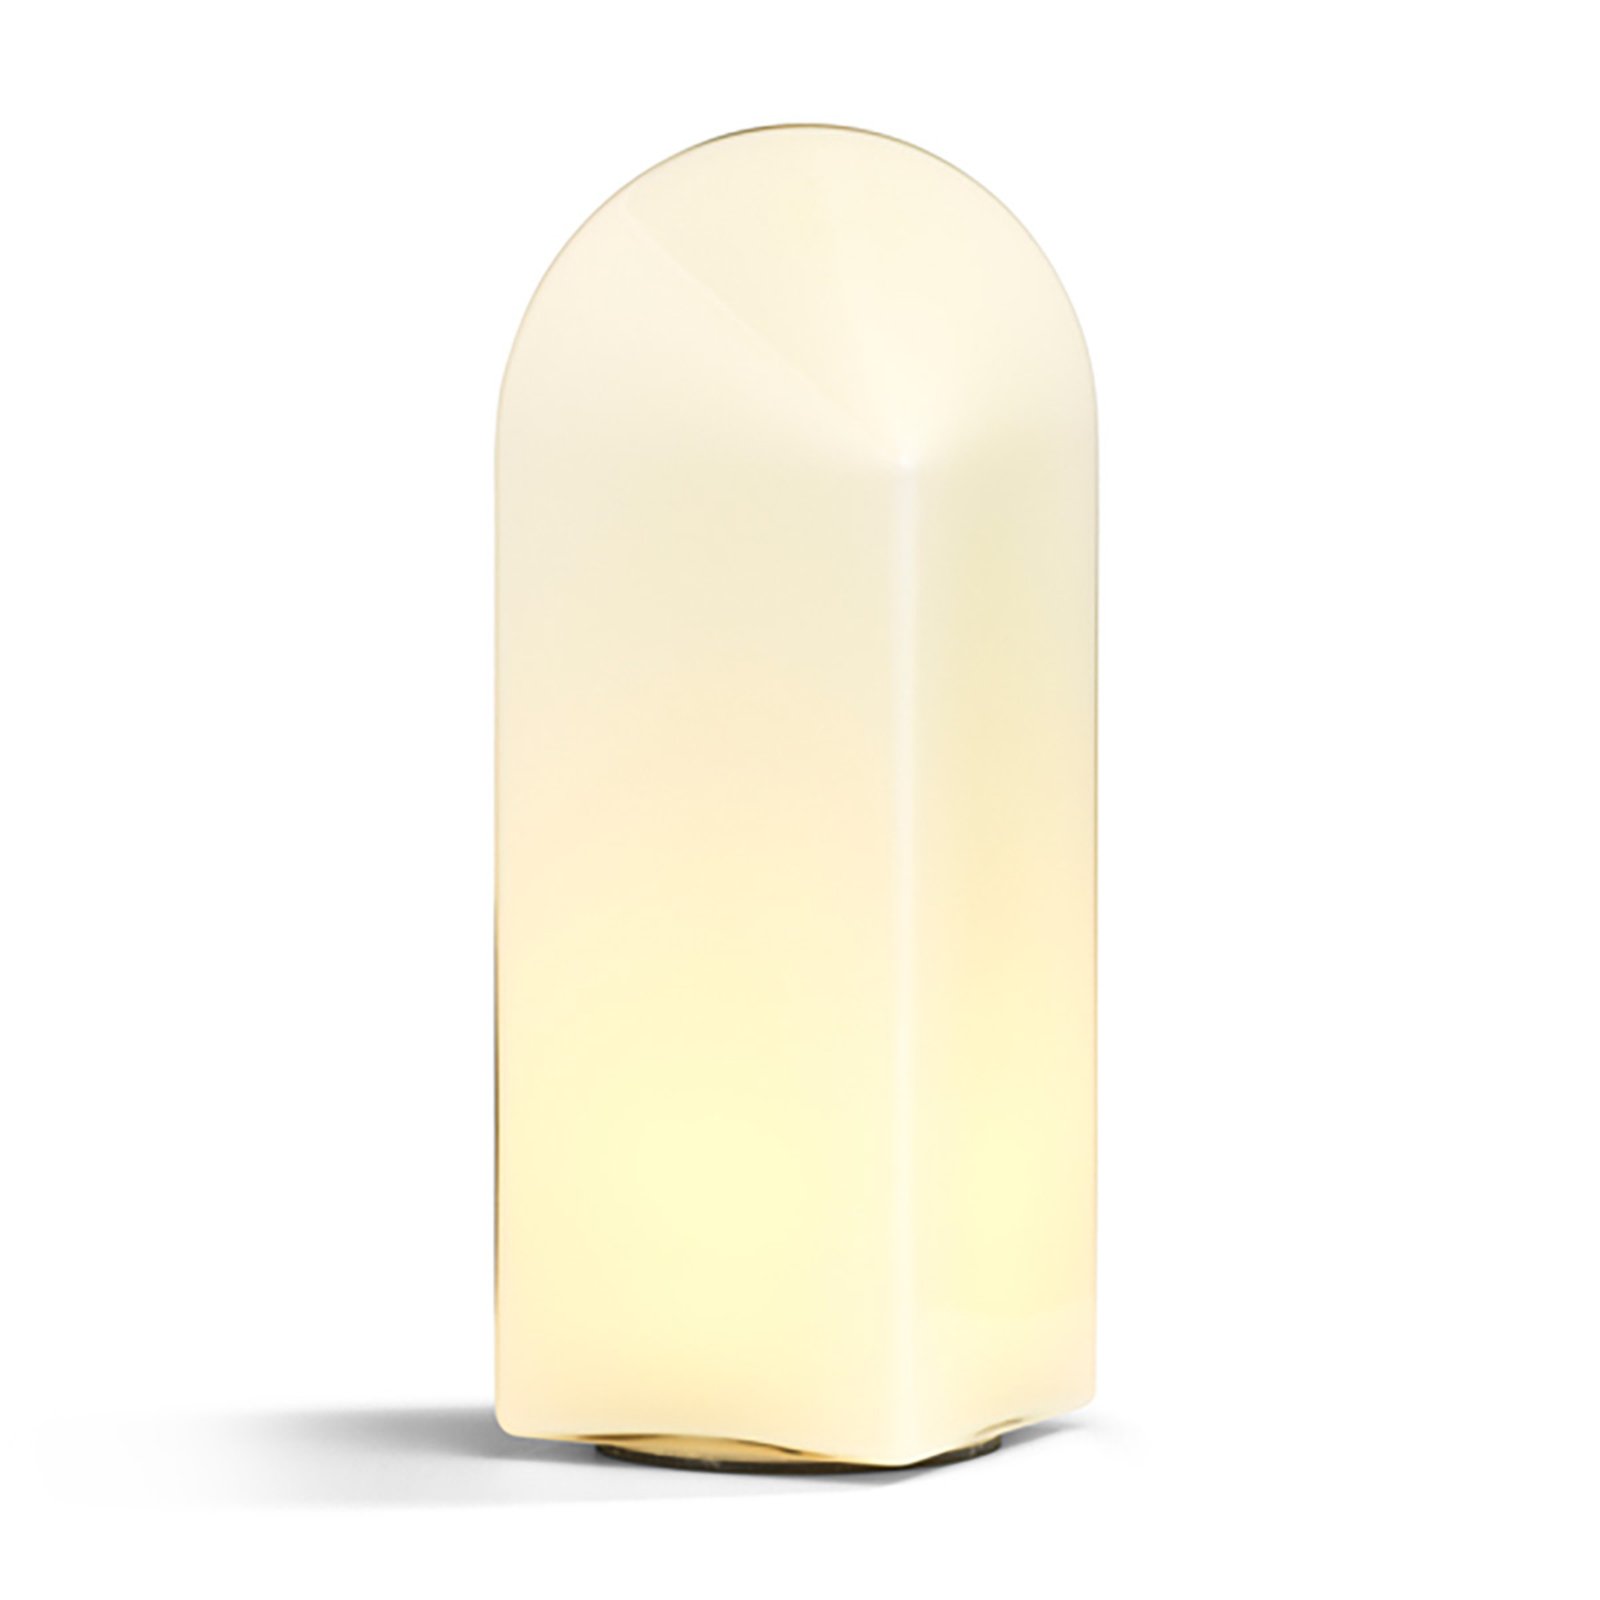 HAY Parade lampe à poser LED blanc coquille 32 cm